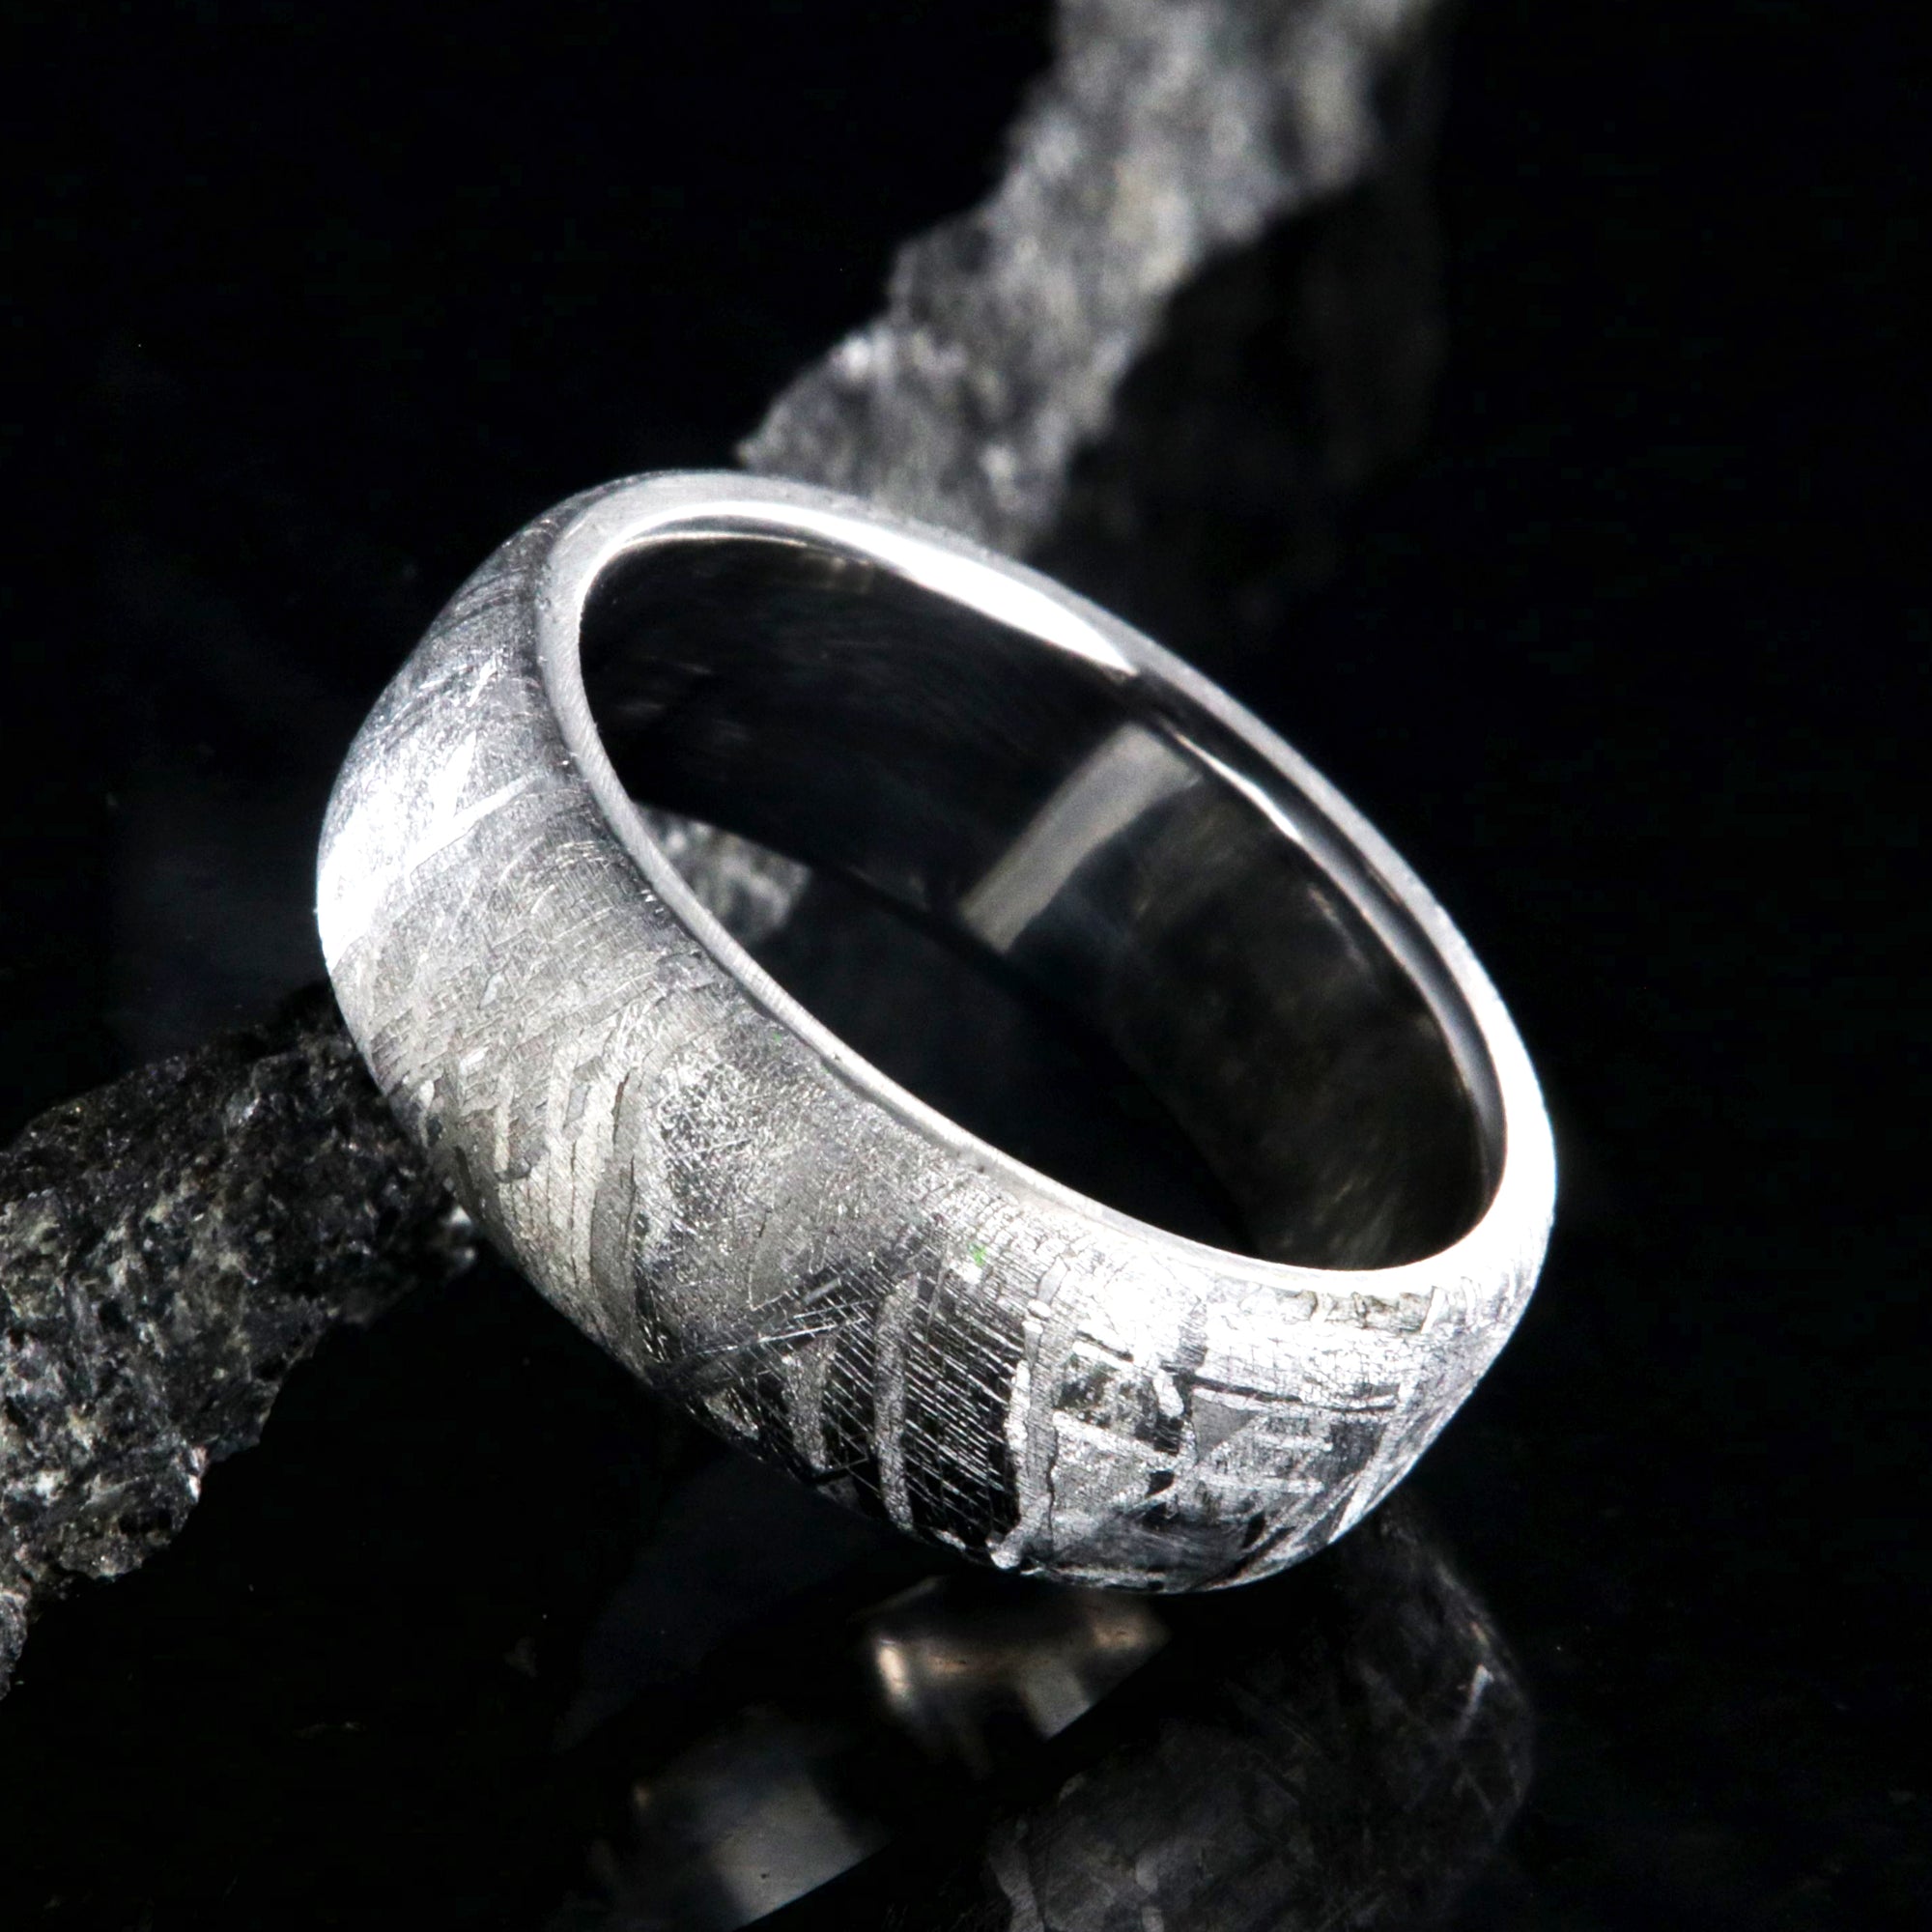 7mm wide Gibeon meteorite wedding band with a cobalt sleeve and rounded profile